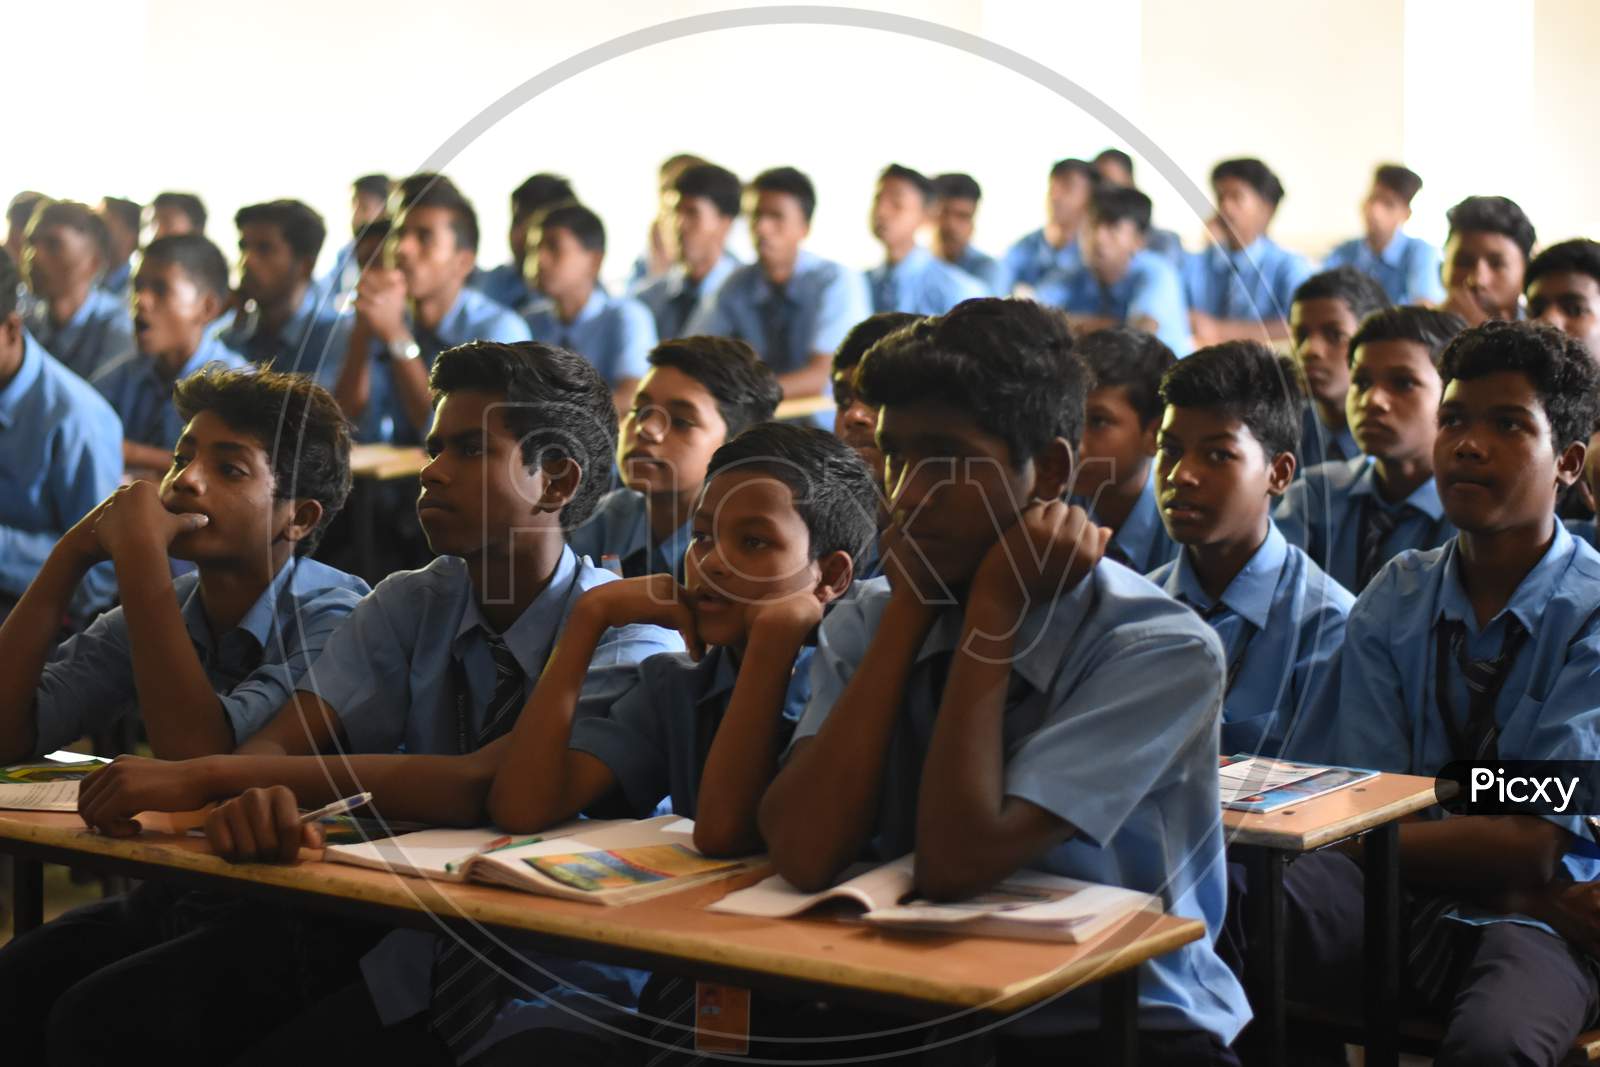 Closeup image of Group of unidentified Indian  students of government school sitting inside the class room  and enjoying class activity